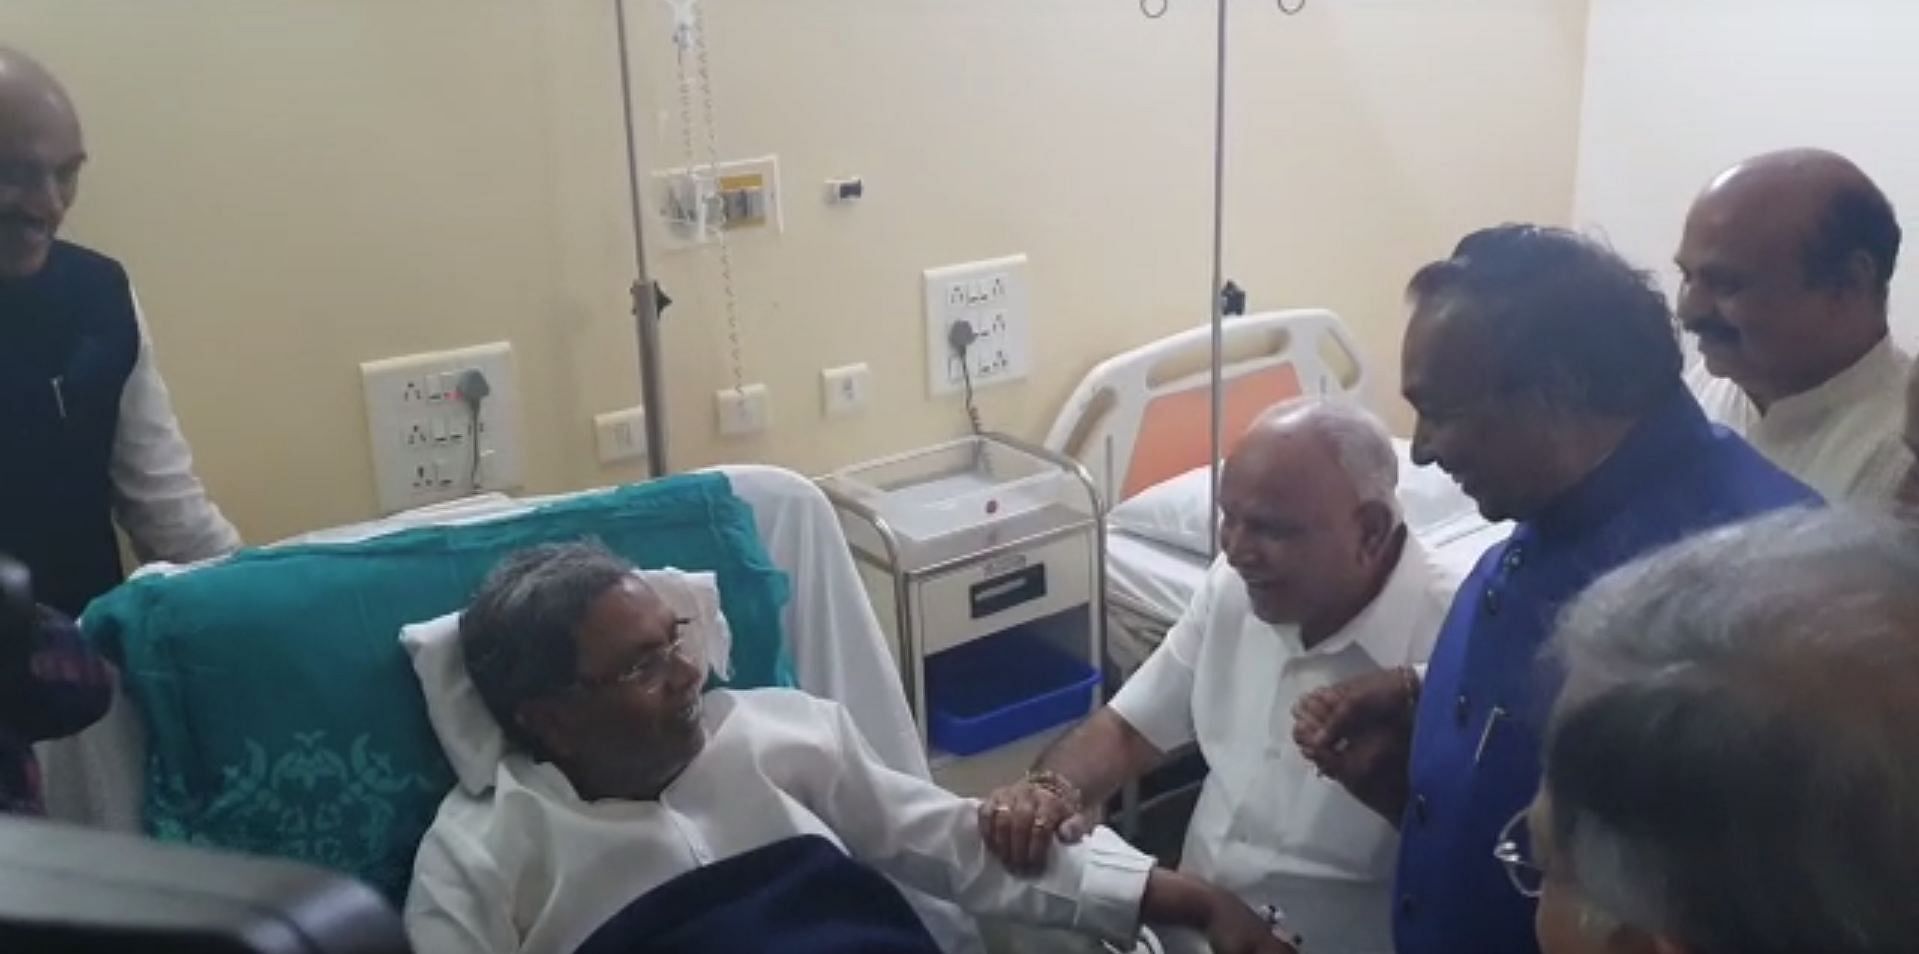 The visit turned into a laughter riot when Eshwarappa and Siddaramaiah, who otherwise engage in bitter political scuffles, locked horns in jest for a change. Photo/Screengrab